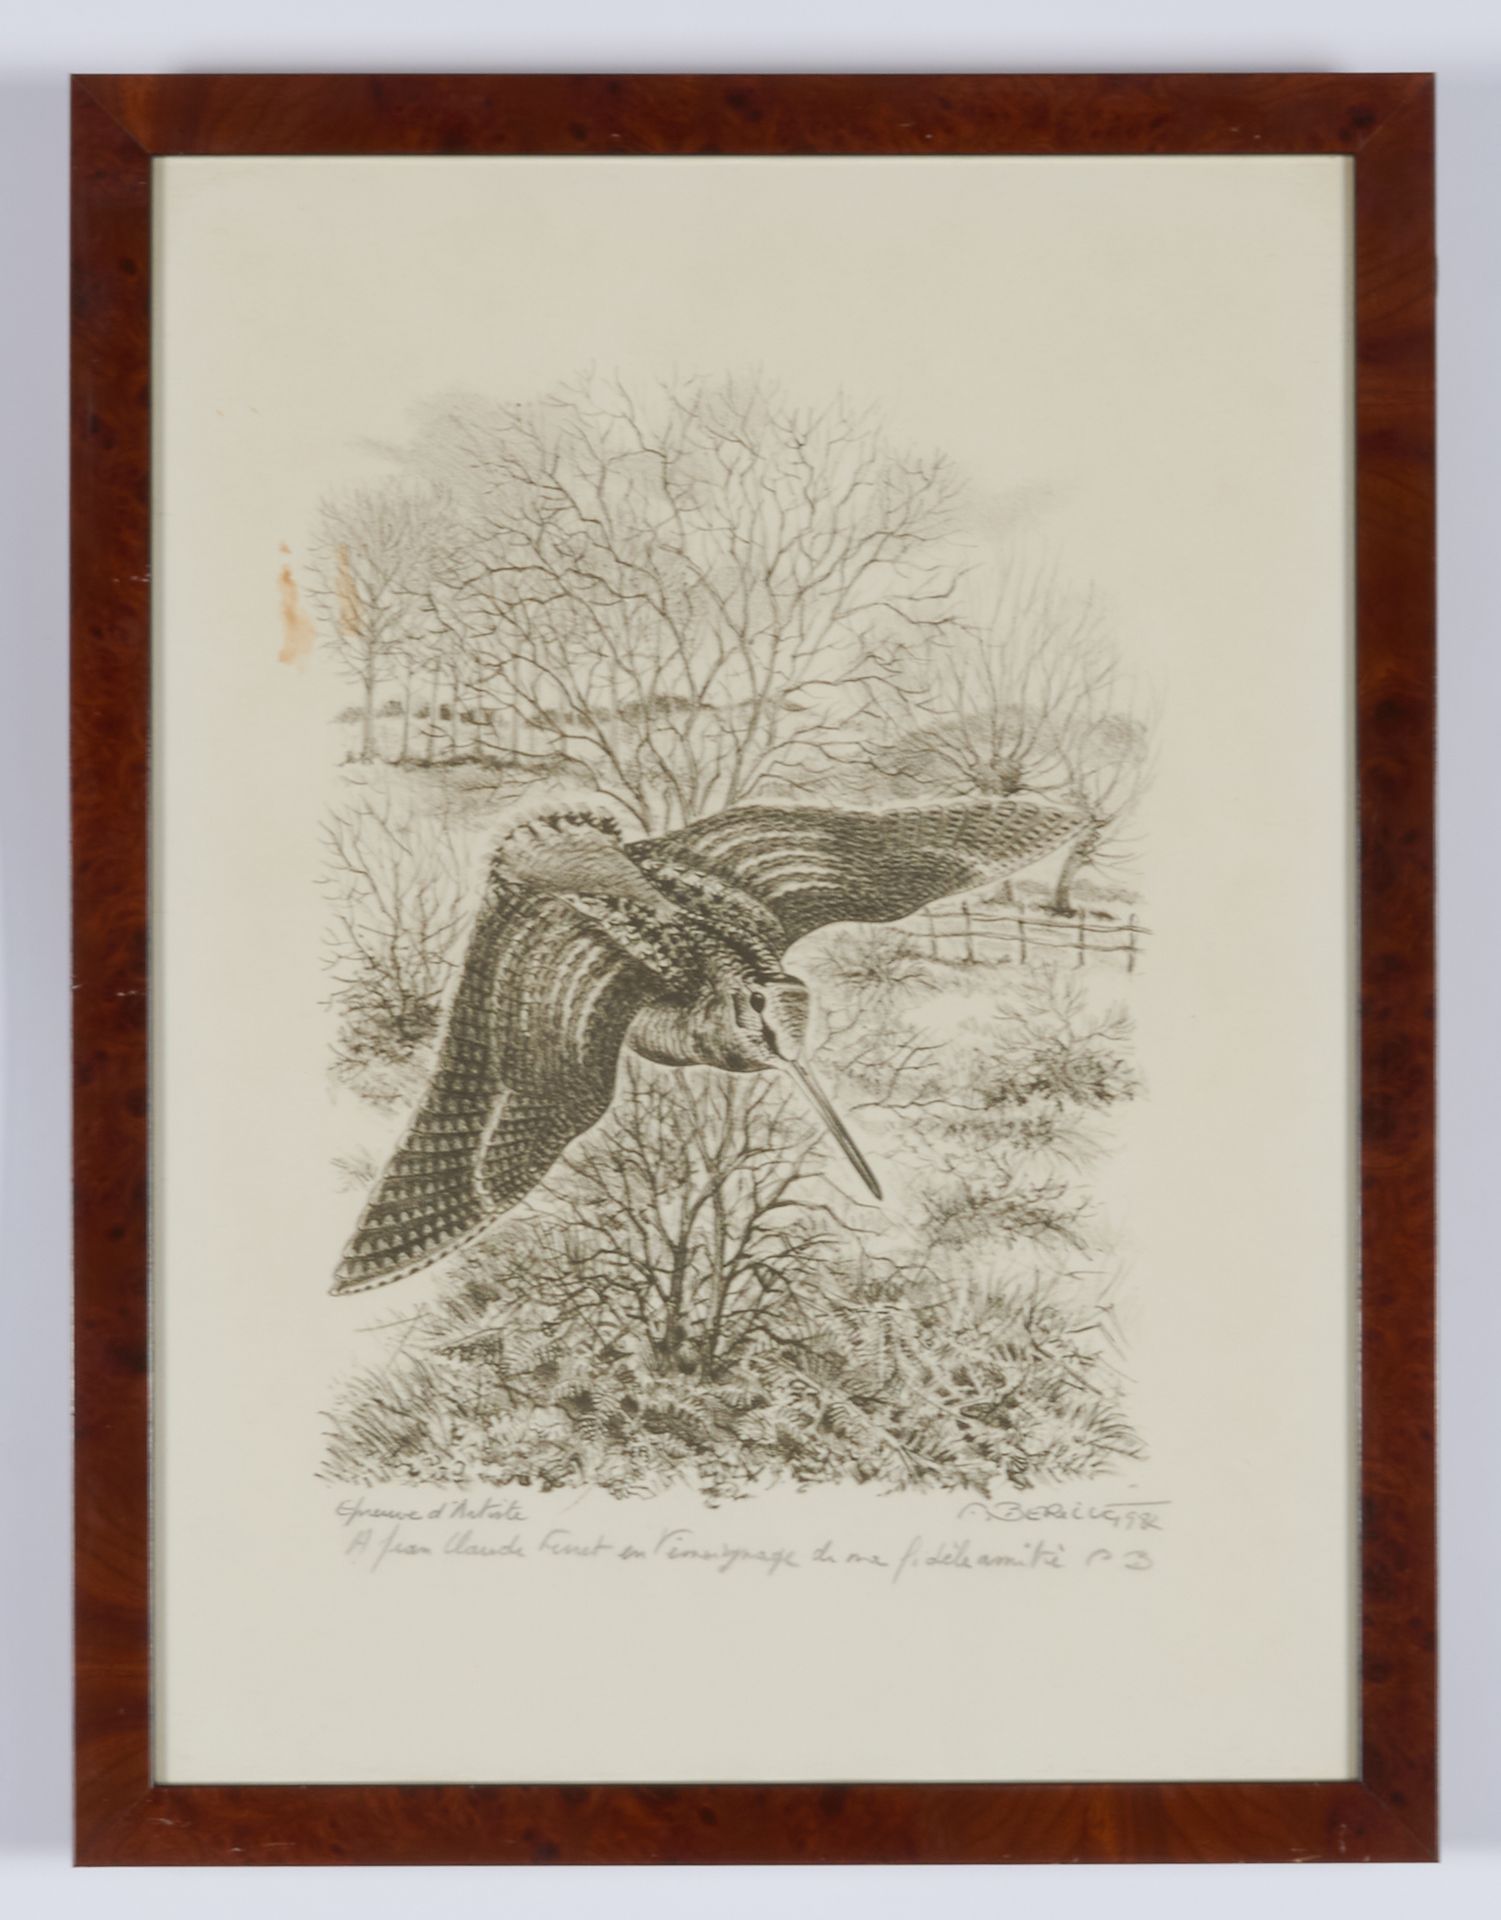 Null BERILLE Francis (born in 1945)

"The woodcock" artist's proof signed and da&hellip;